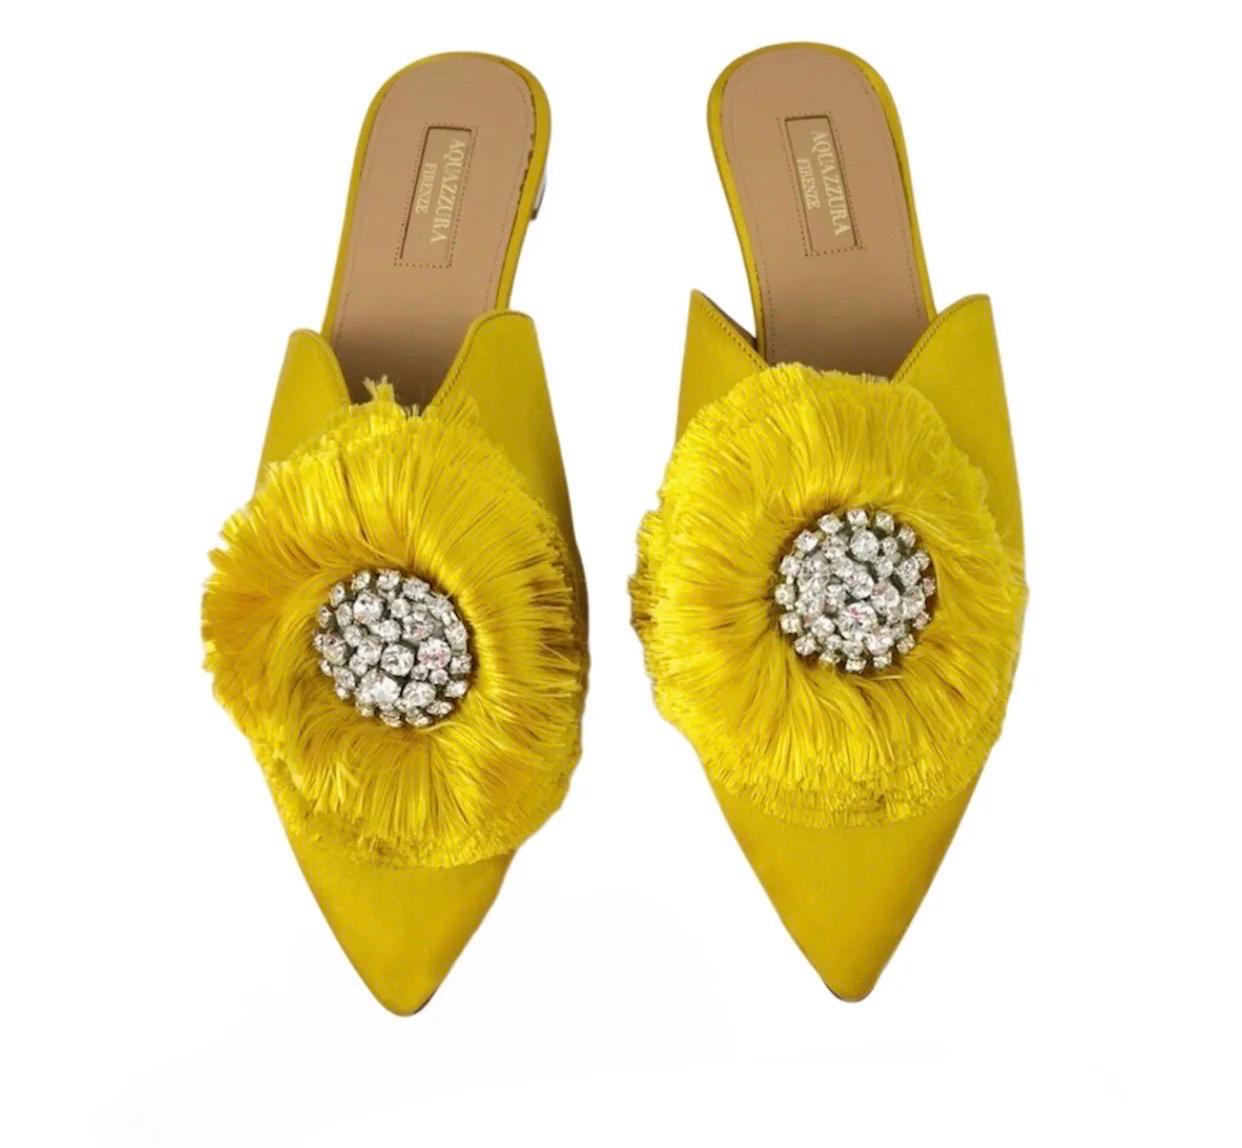 Aquazzura Mustard yellow satin pointed-toe mules, with crystal-studded pom-pom detail. 

Material: Satin
Size: EU 38.5
Overall Condition: Excellent
Interior Condition: signs of use 
Exterior Condition: Very light visible signs of use
*Includes